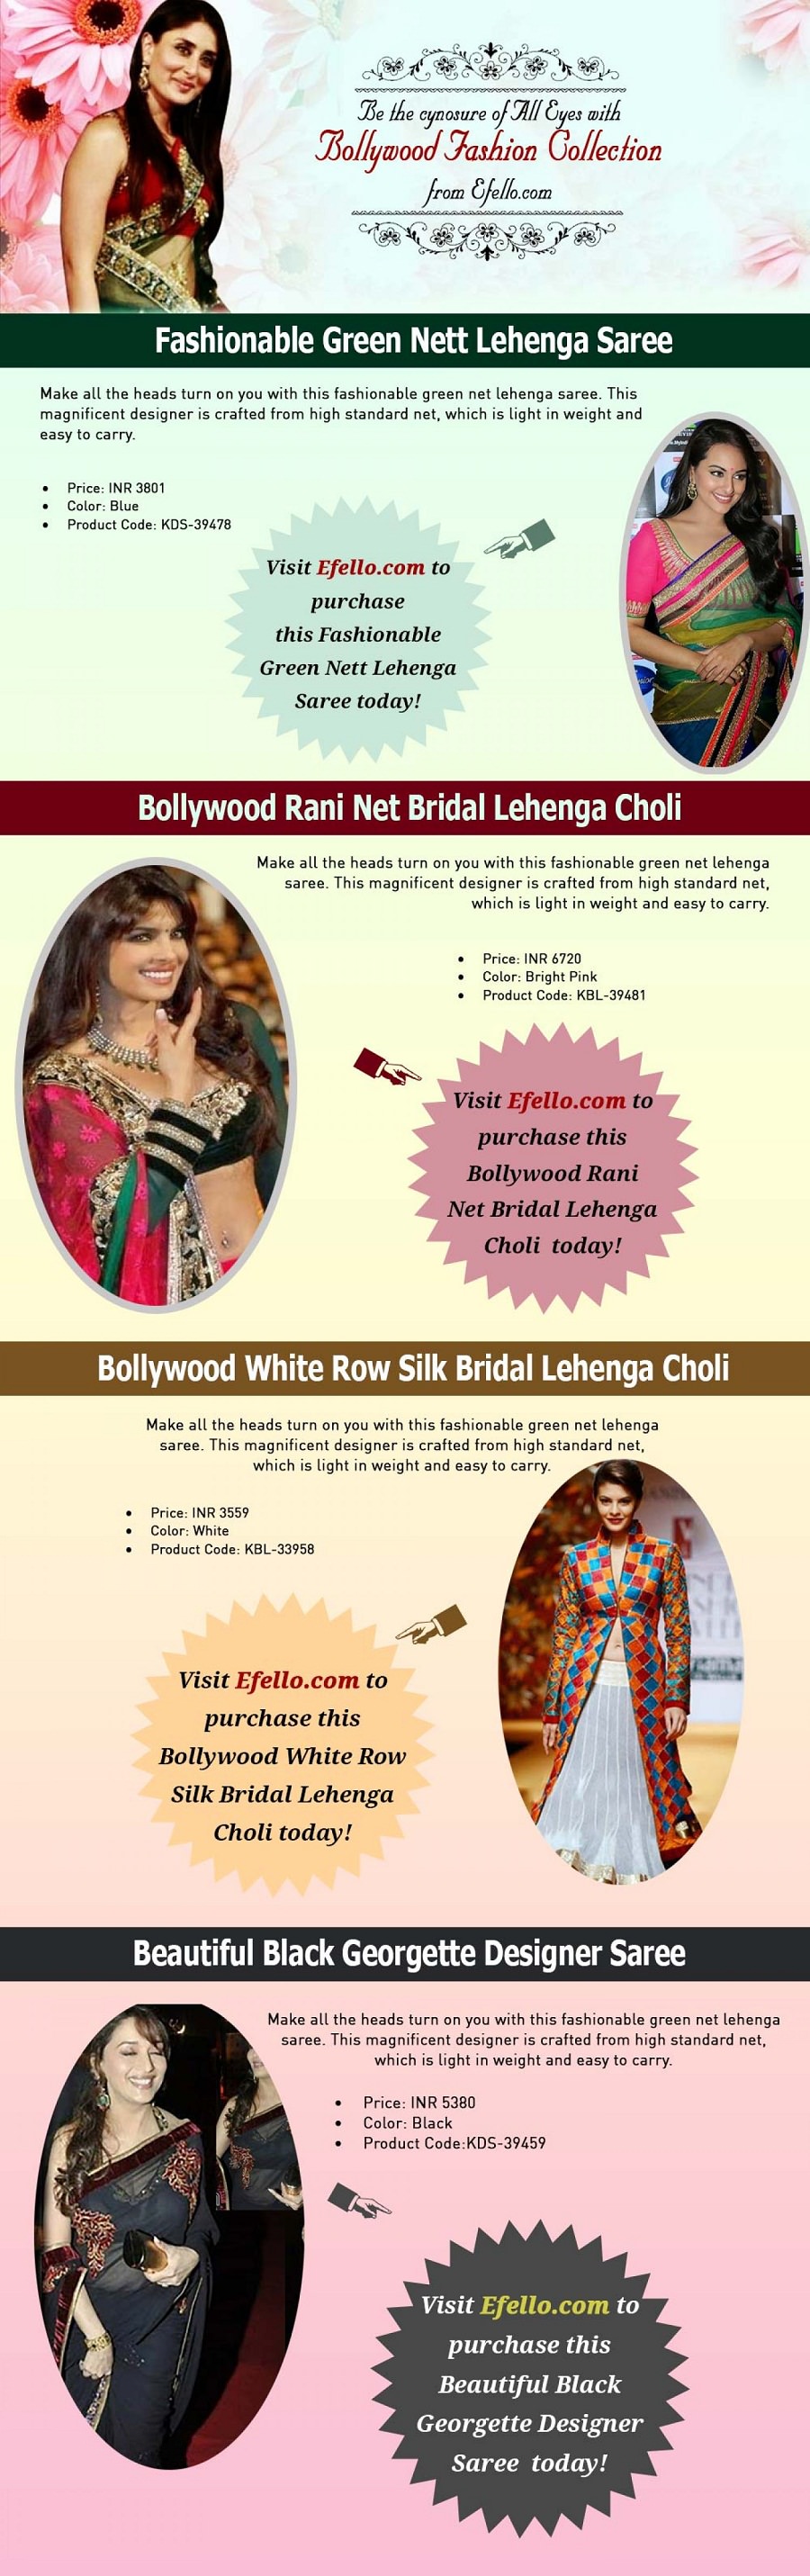 bollywood fashion collection